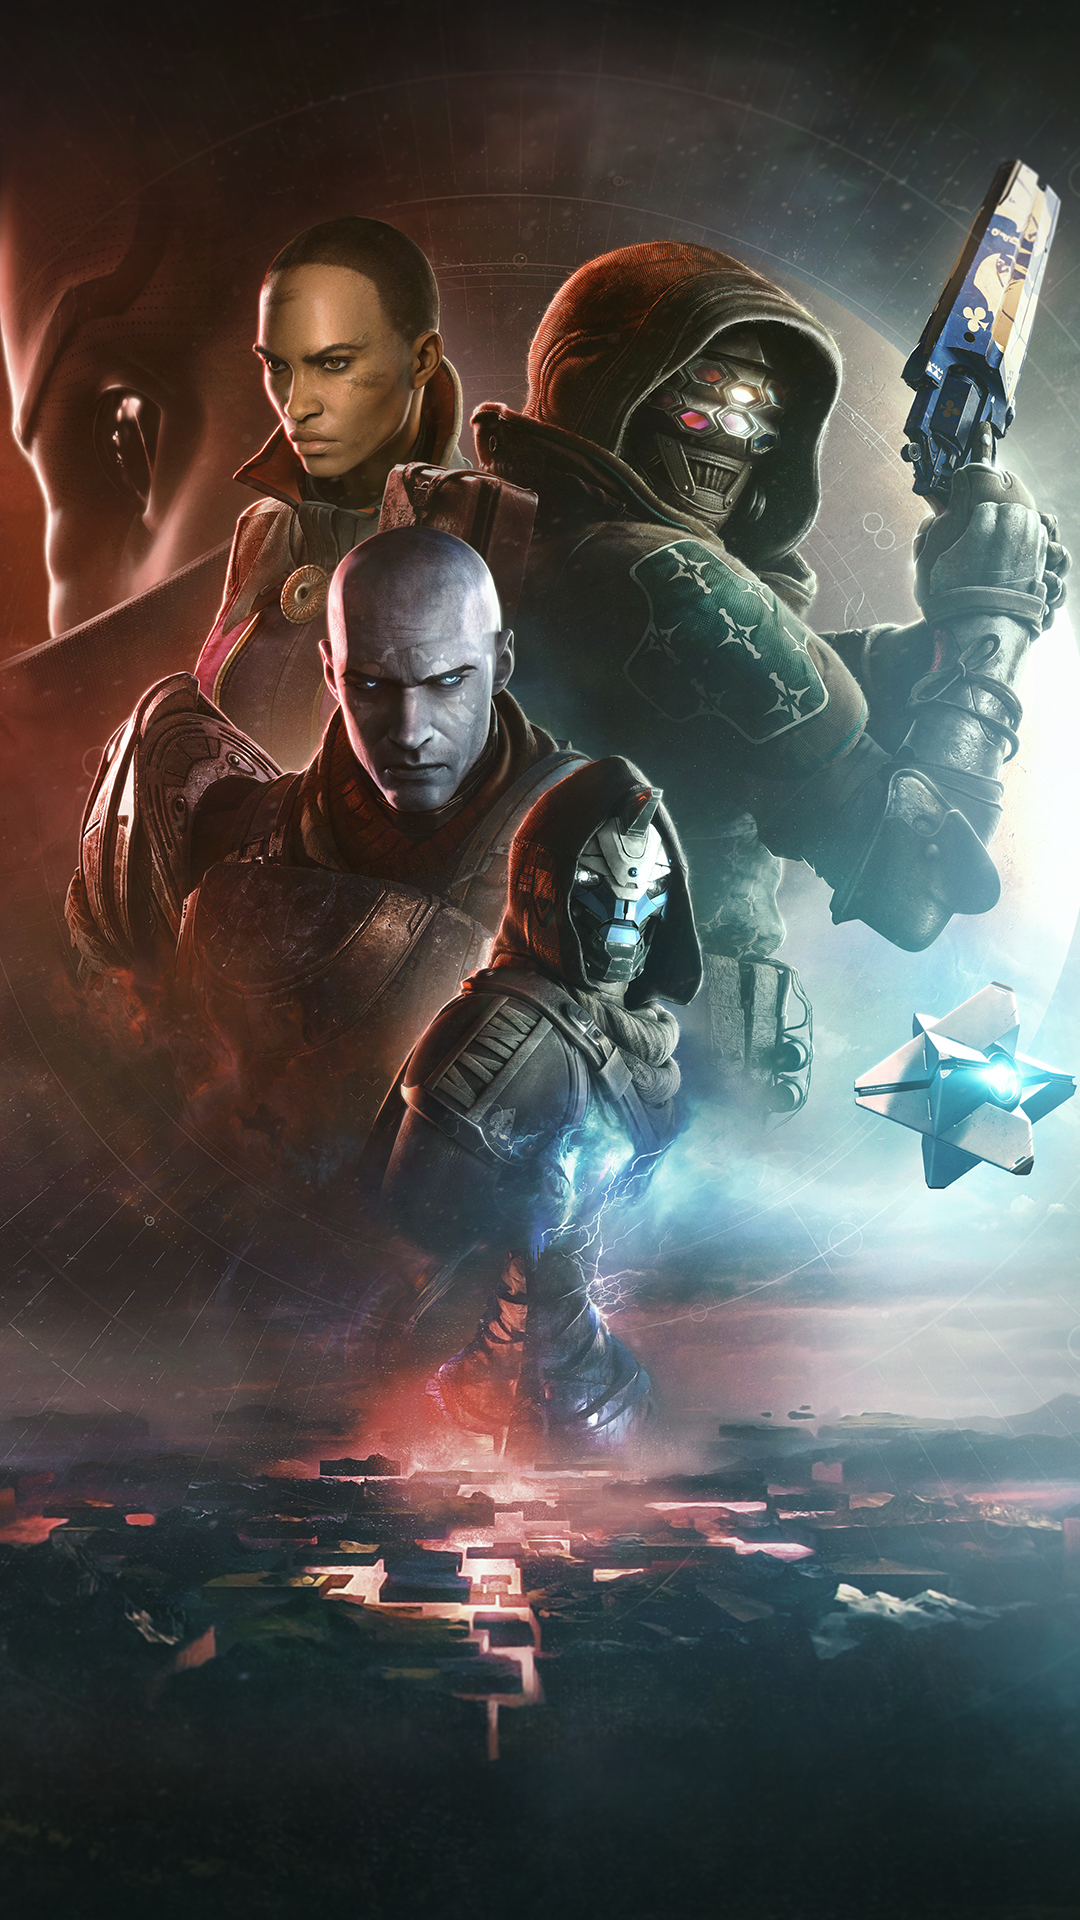 Destiny 2-themed phone wallpaper featuring game characters in action poses with a dynamic, sci-fi backdrop.